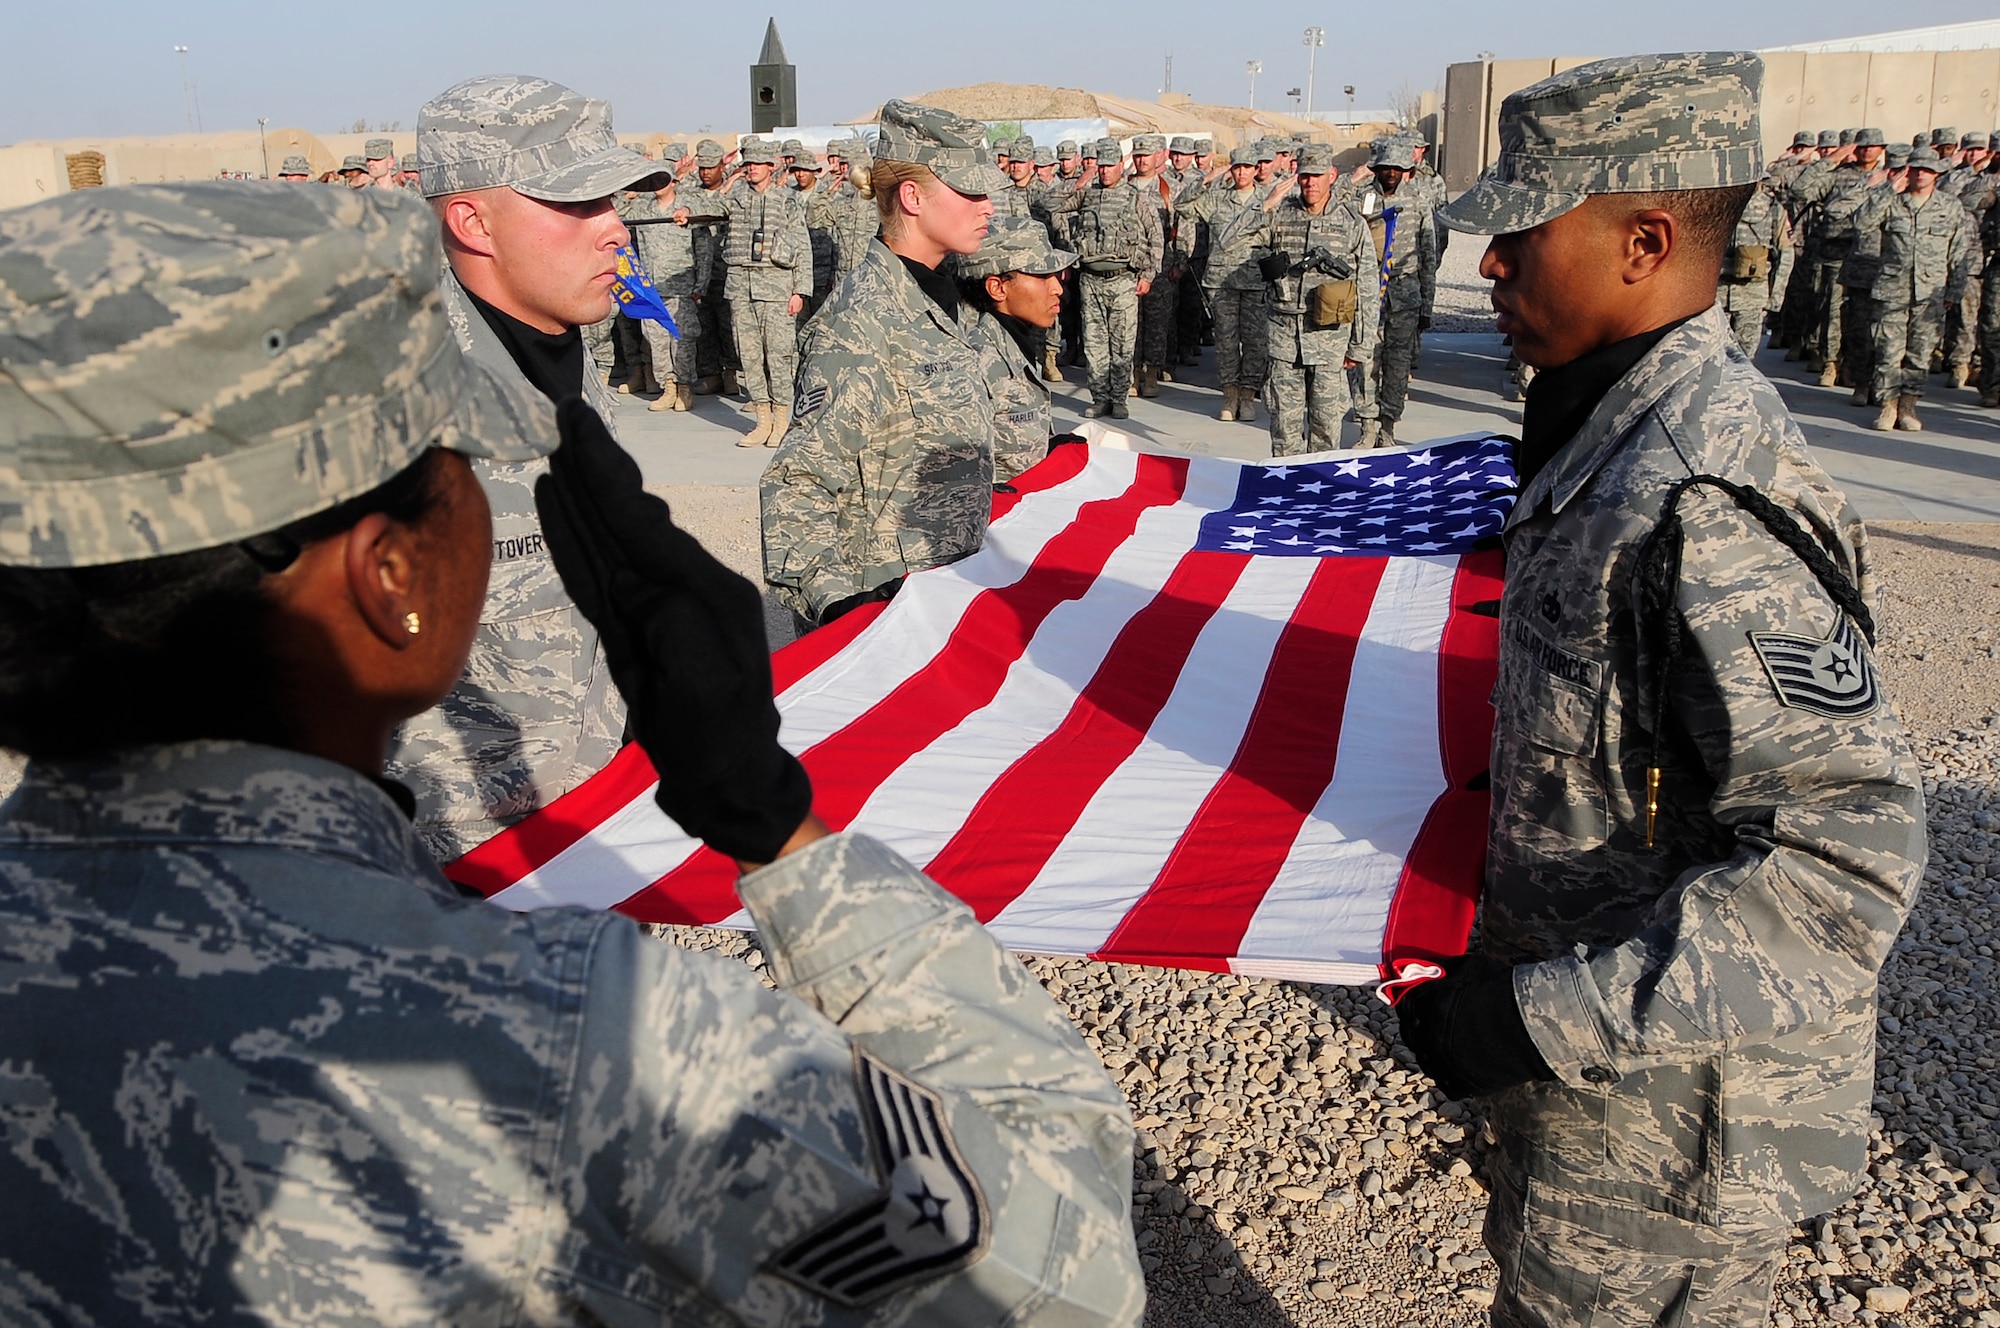 ALI BASE, Iraq – U.S. Air Force members of the honor guard here folds the flag during a retreat ceremony on the eighth anniversary of the terrorist attacks of Sept. 11, 2001. The ceremony was attended by U.S. Airmen, Soldiers, and civilians and paid tribute to those who lost their lives on that fateful day. (U.S. Air Force photo / Senior Airman Tony R. Ritter)